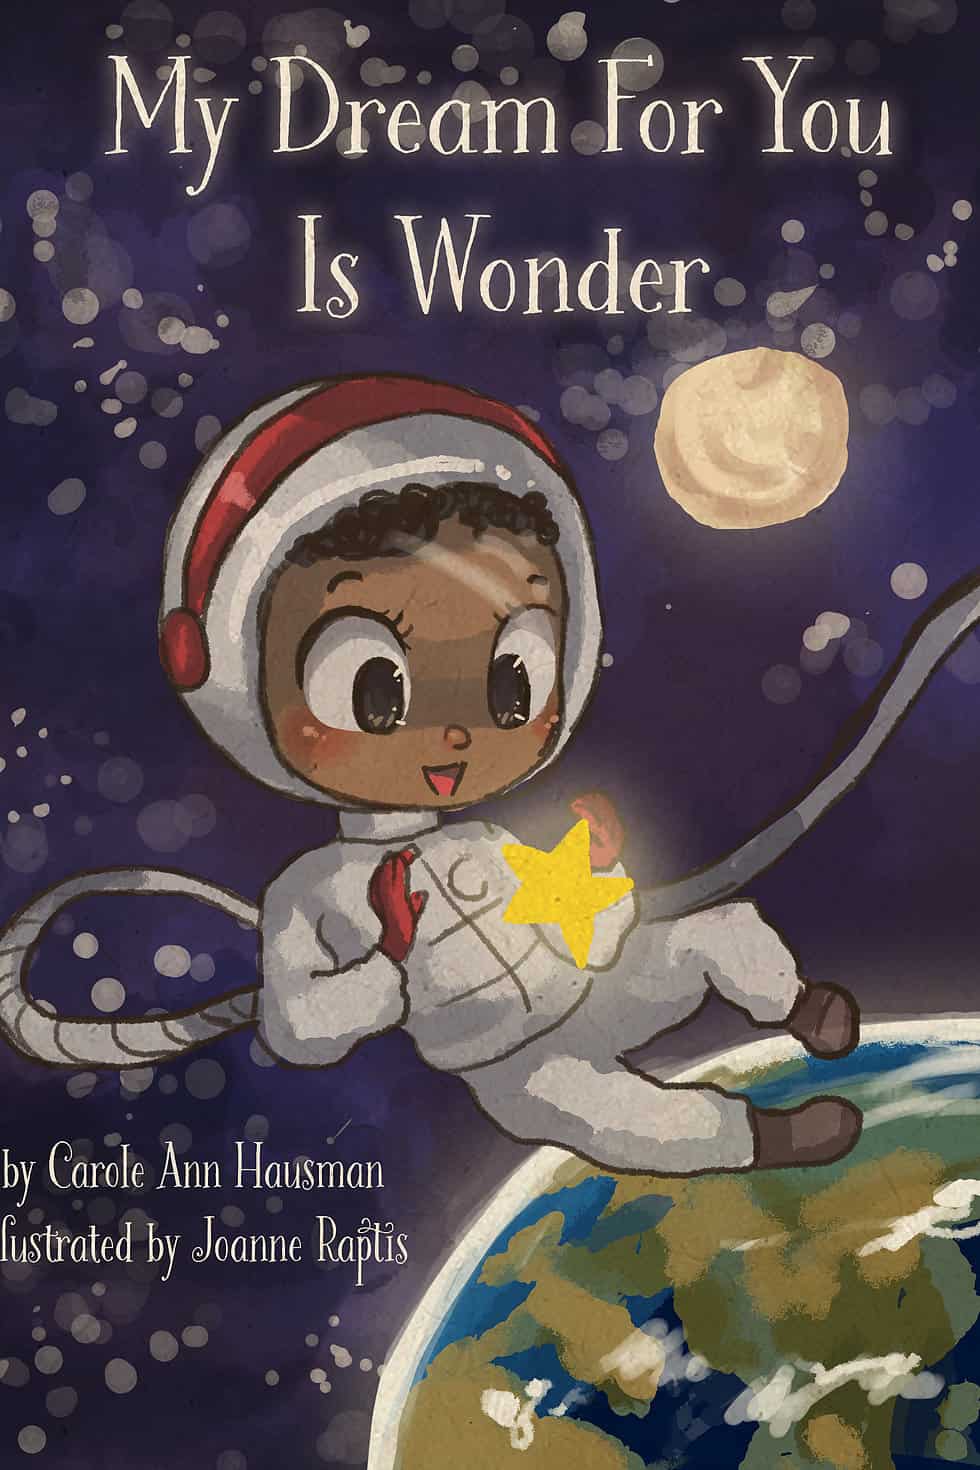 My dream for you is wonder book cover